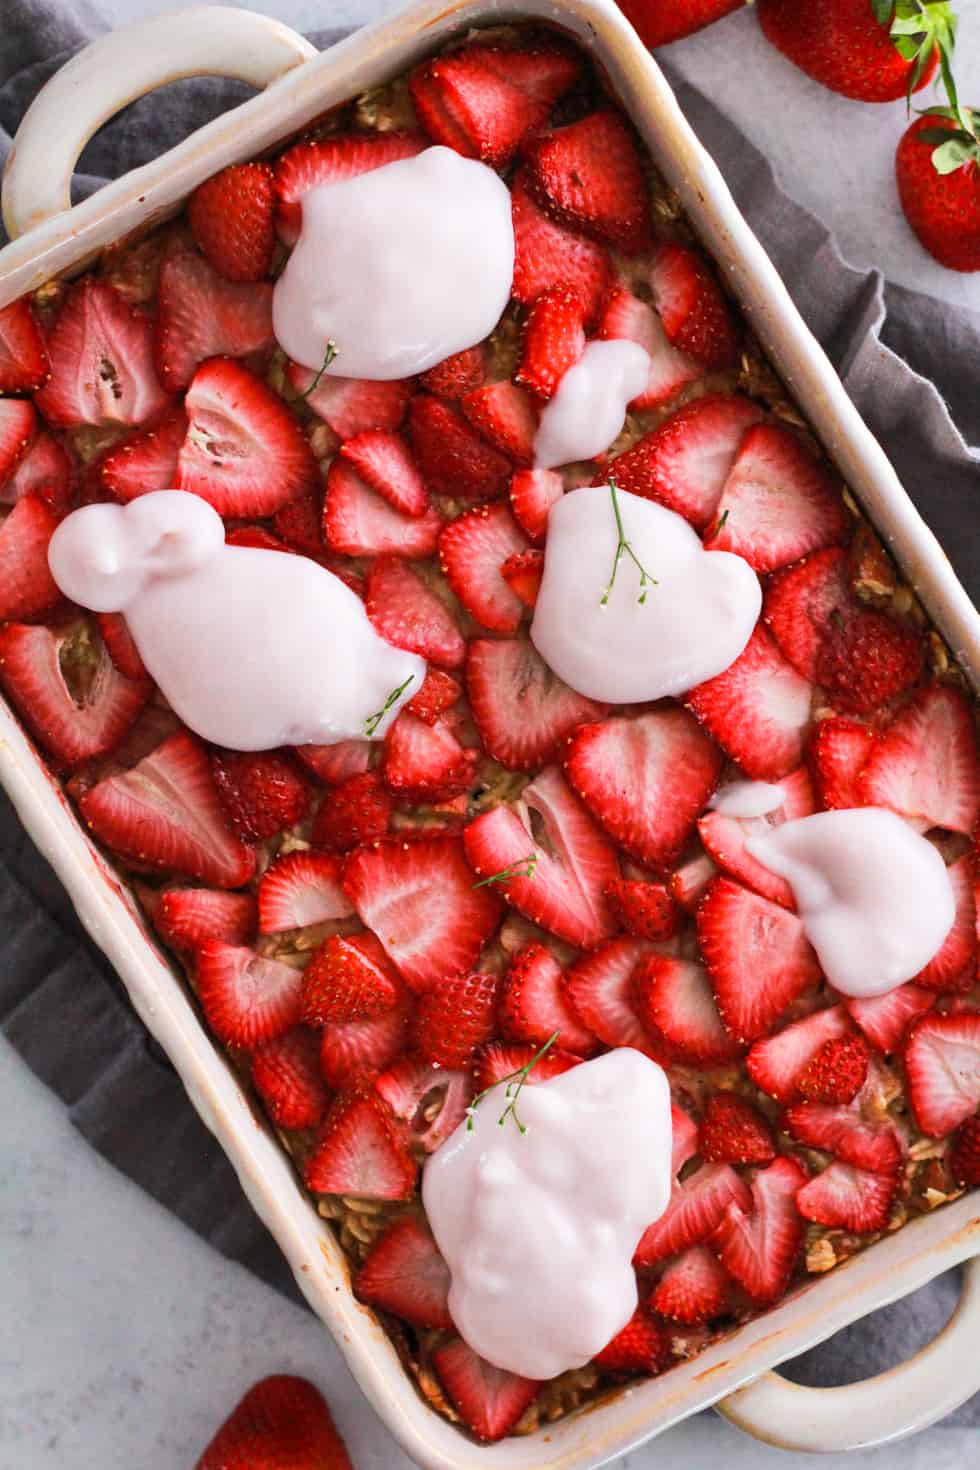 Overhead image of vegan baked oatmeal topped with strawberries and yogurt alternative.